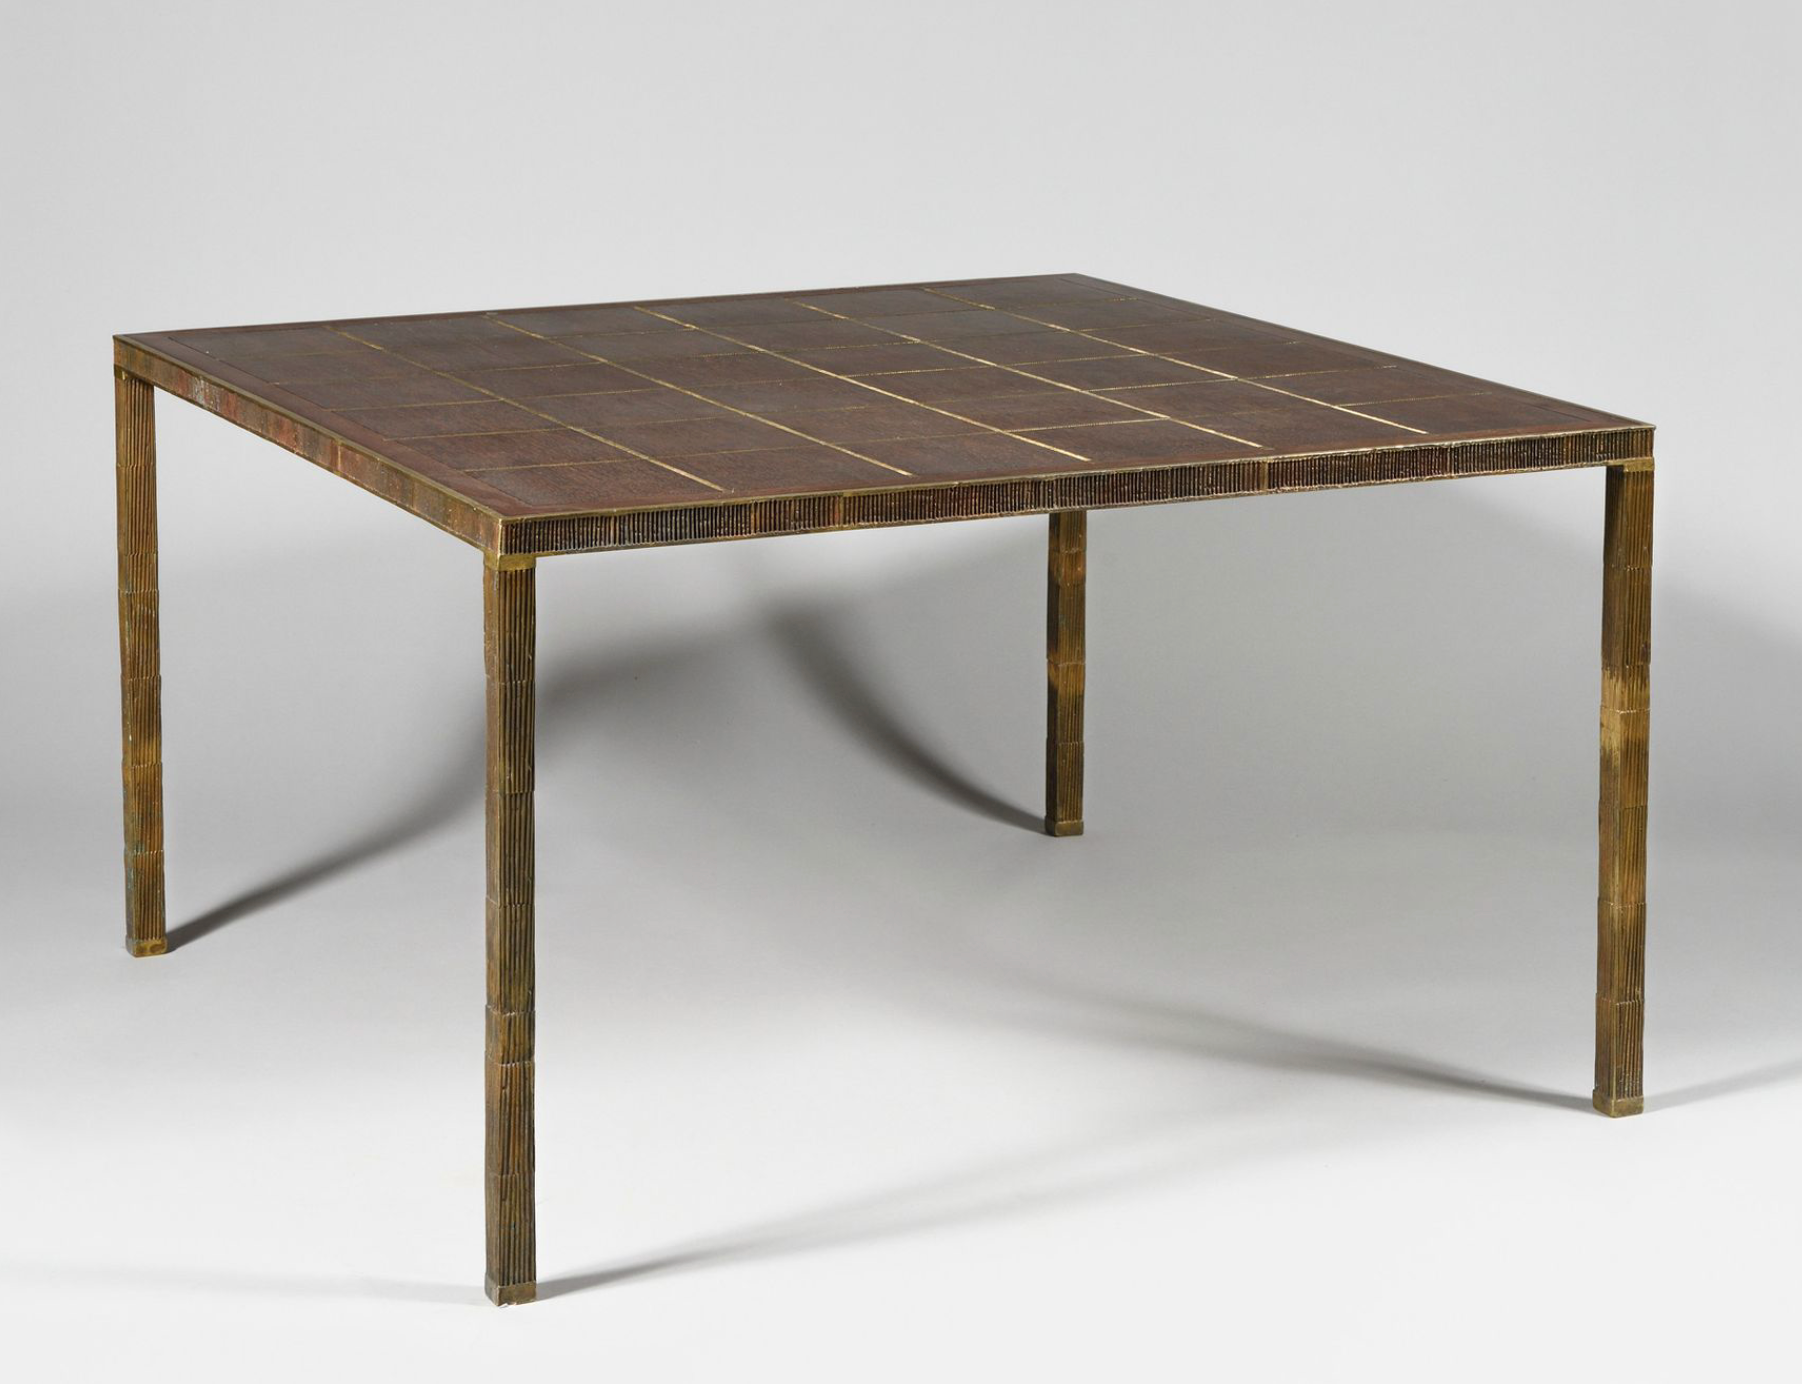 A Palmwood and Bronze Table by Louis Cane